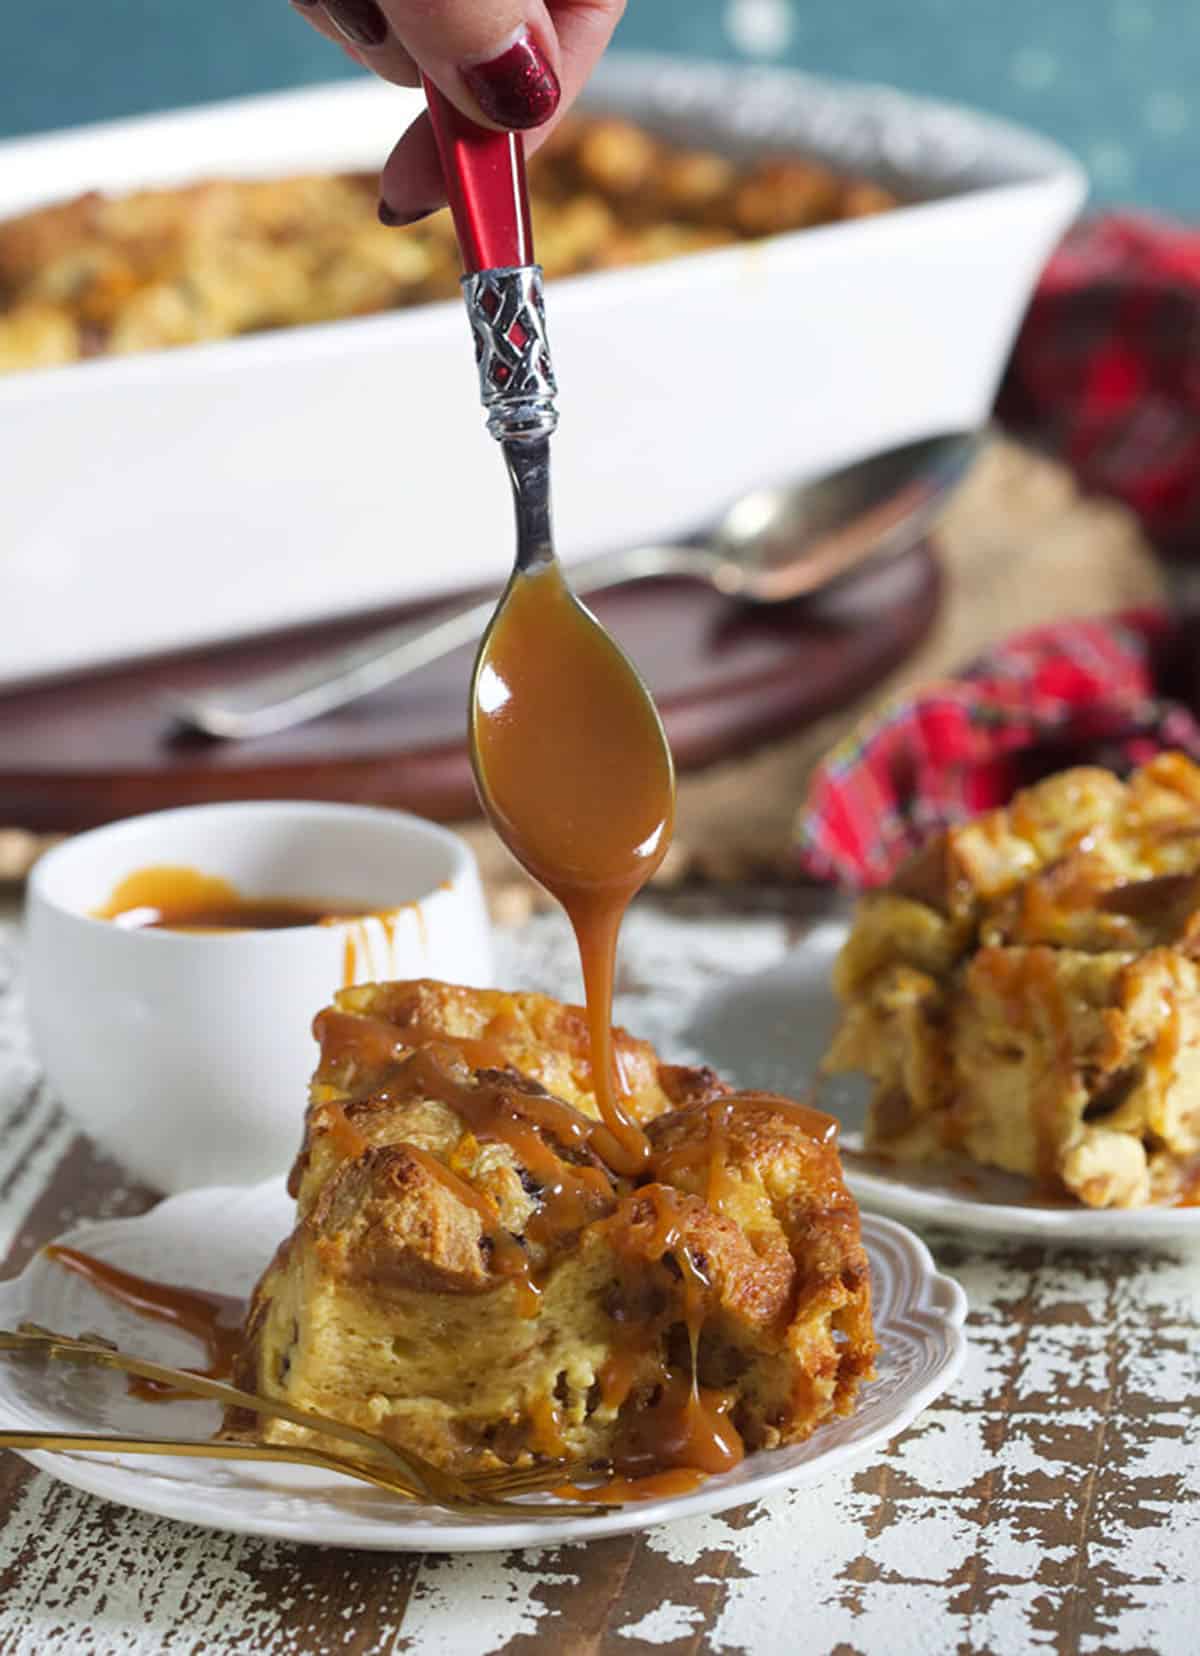 Caramel sauce is being drizzled ontop a single serving of bread pudding.